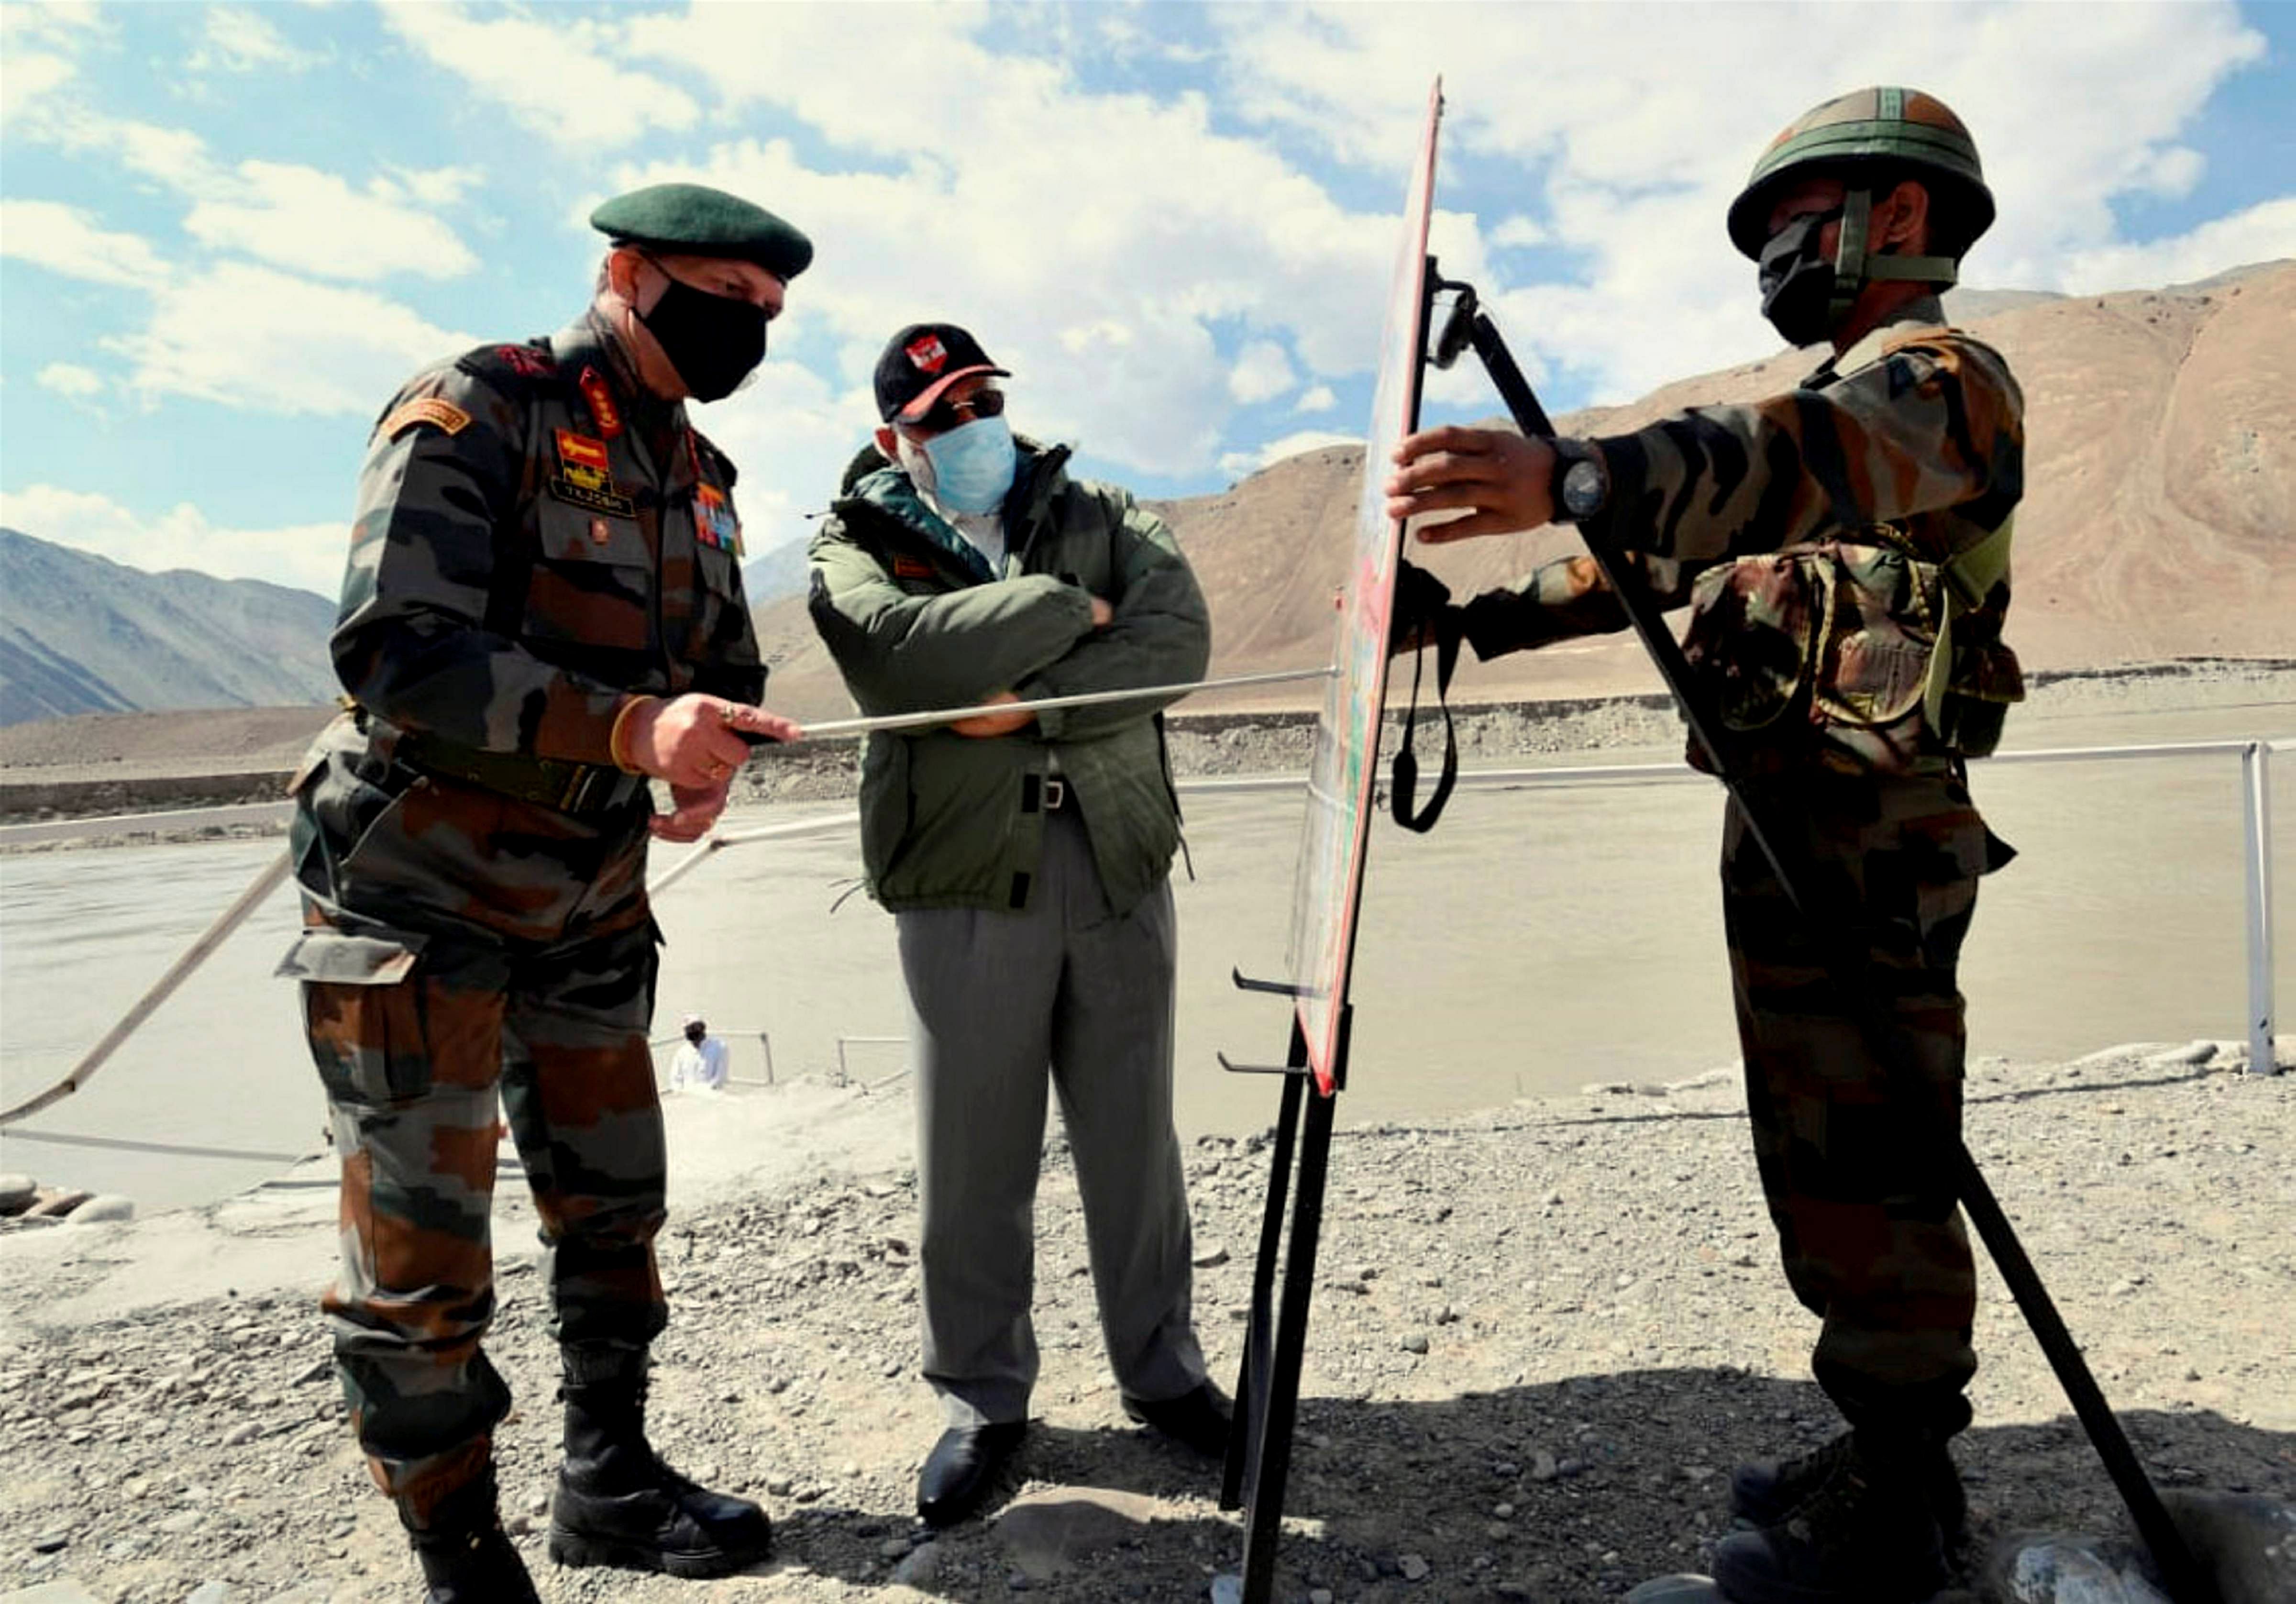 Prime Minister Narendra Modi being briefed by an Army officer in Leh, Friday, July 3, 2020. PM Modi interacted with personnel of the Army, Air Force and Indo-Tibetan Border Police (ITBP). (PIB/PTI Photo)